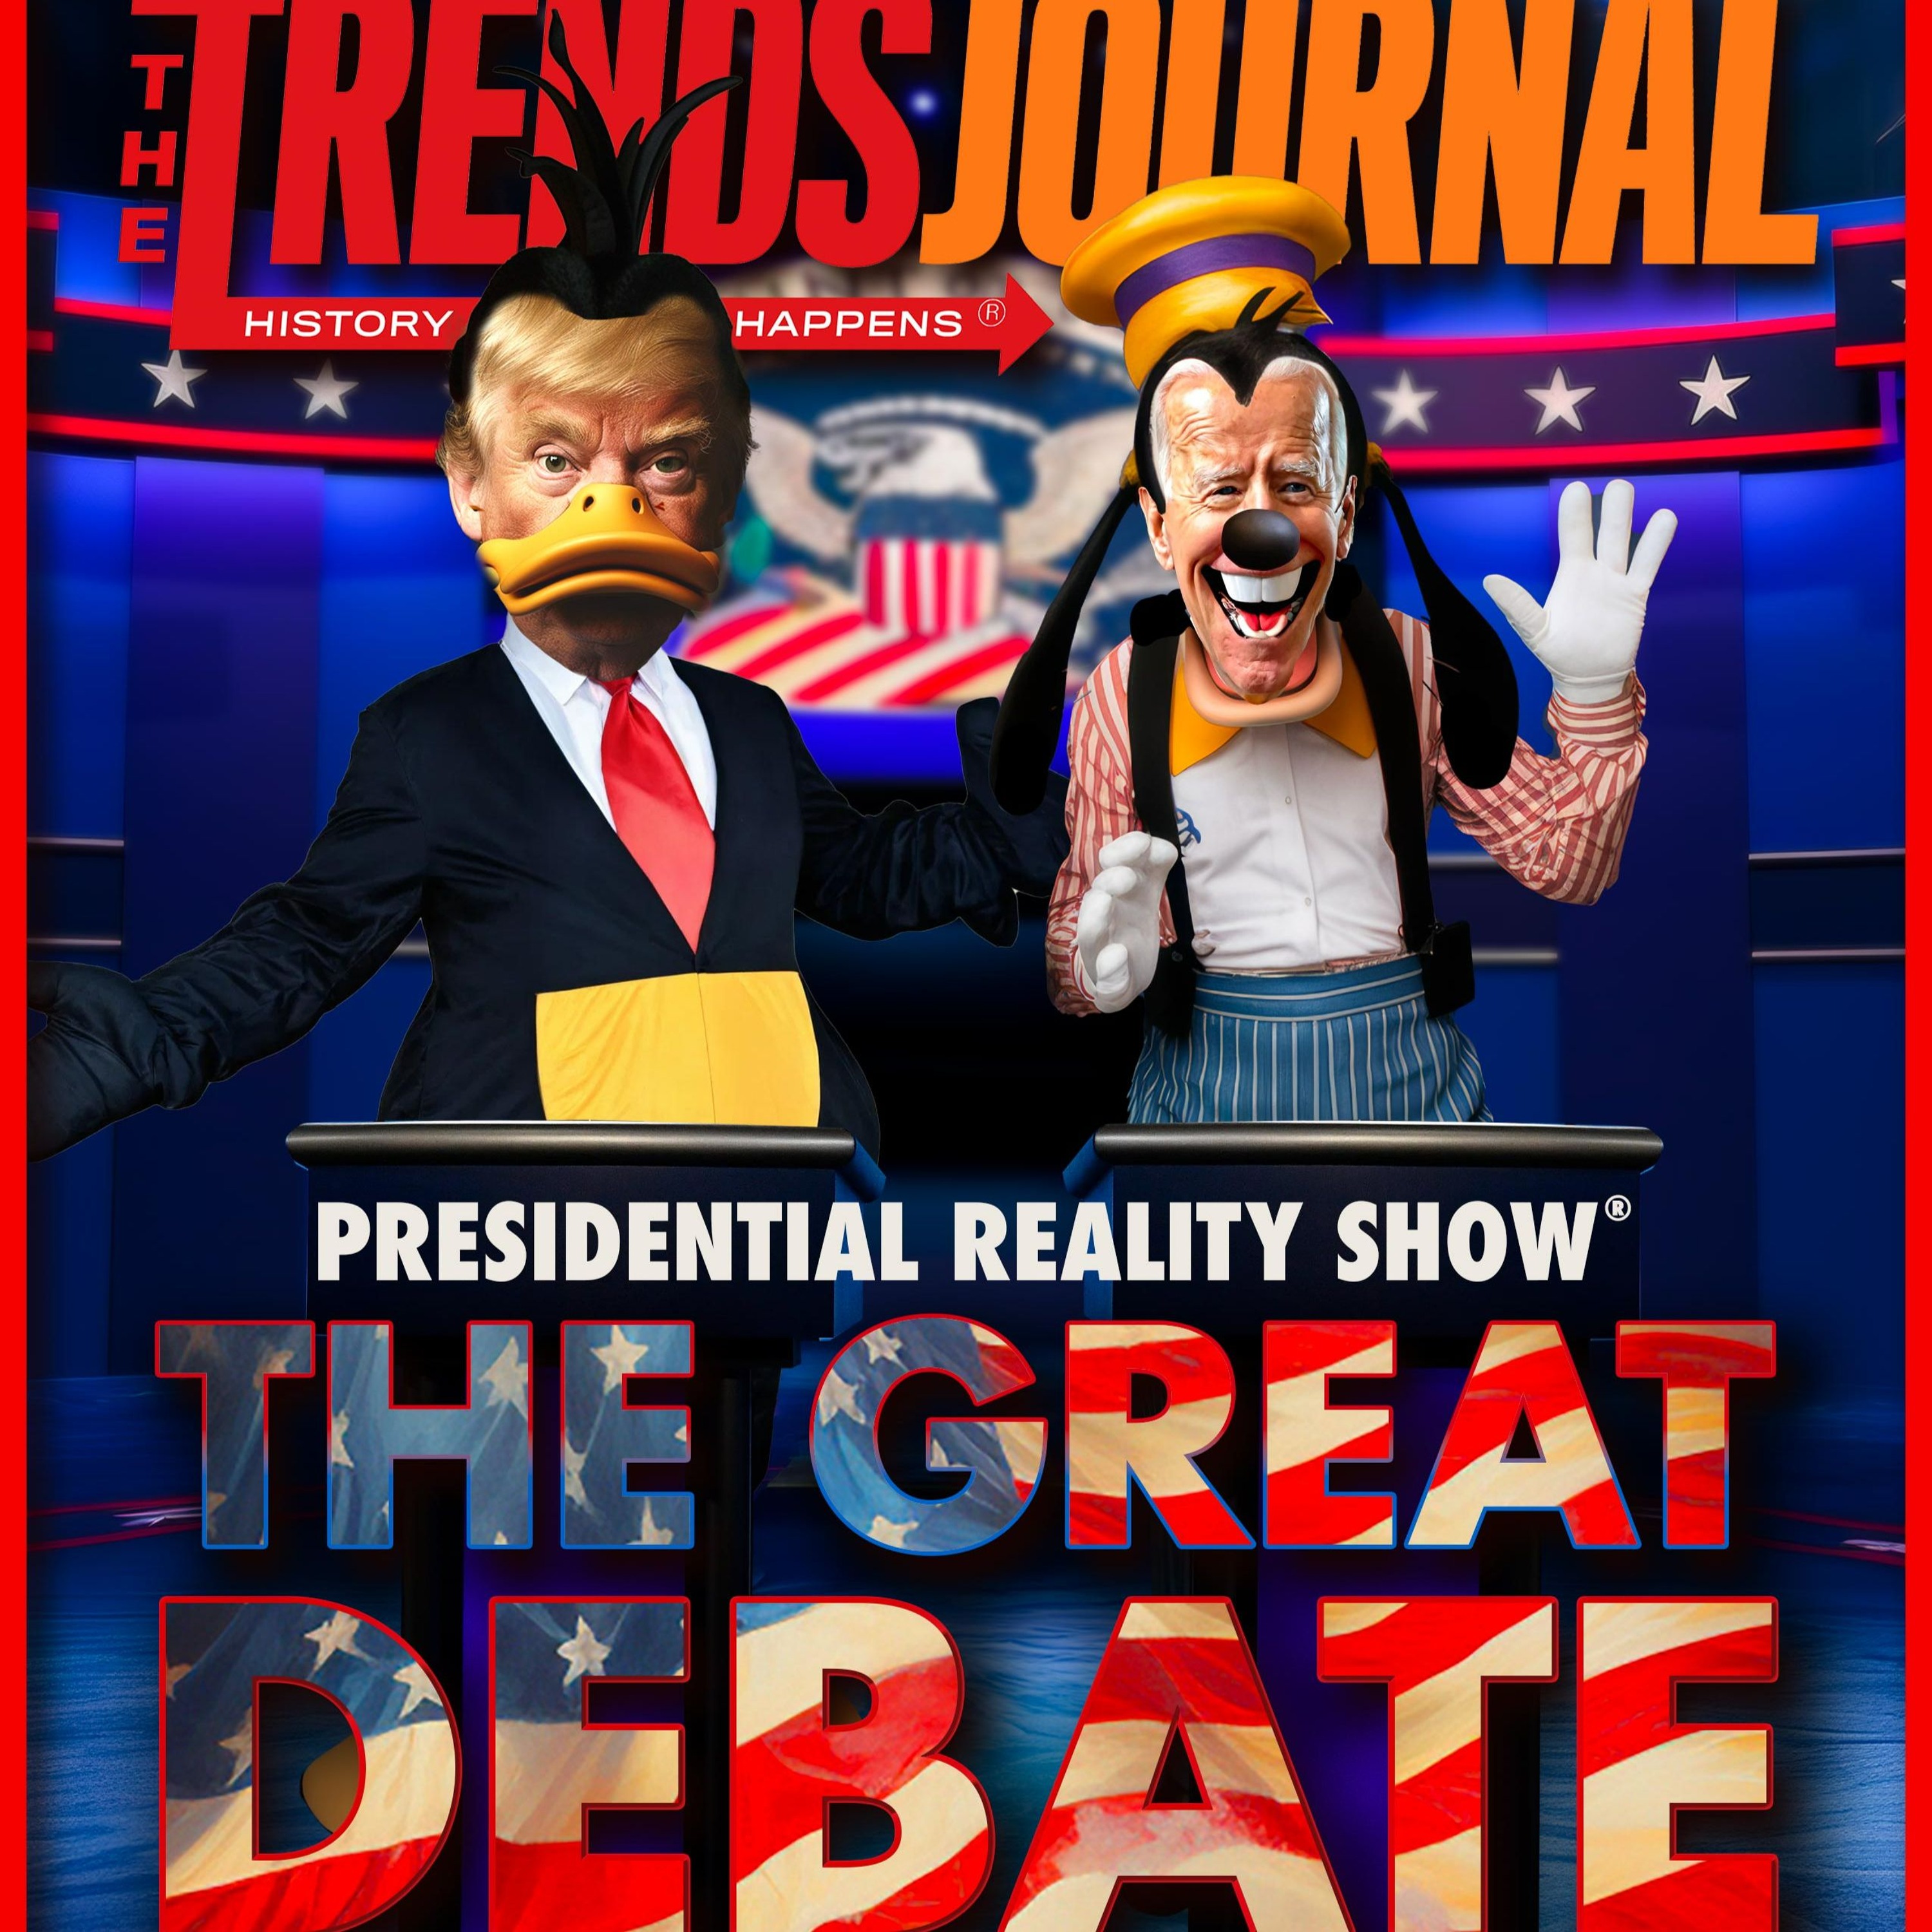 PRESIDENTIAL REALITY SHOW. THE GREAT DEBATE: DAFFY DUCK VS GOOFY. THAT'S ALL FOLKS!